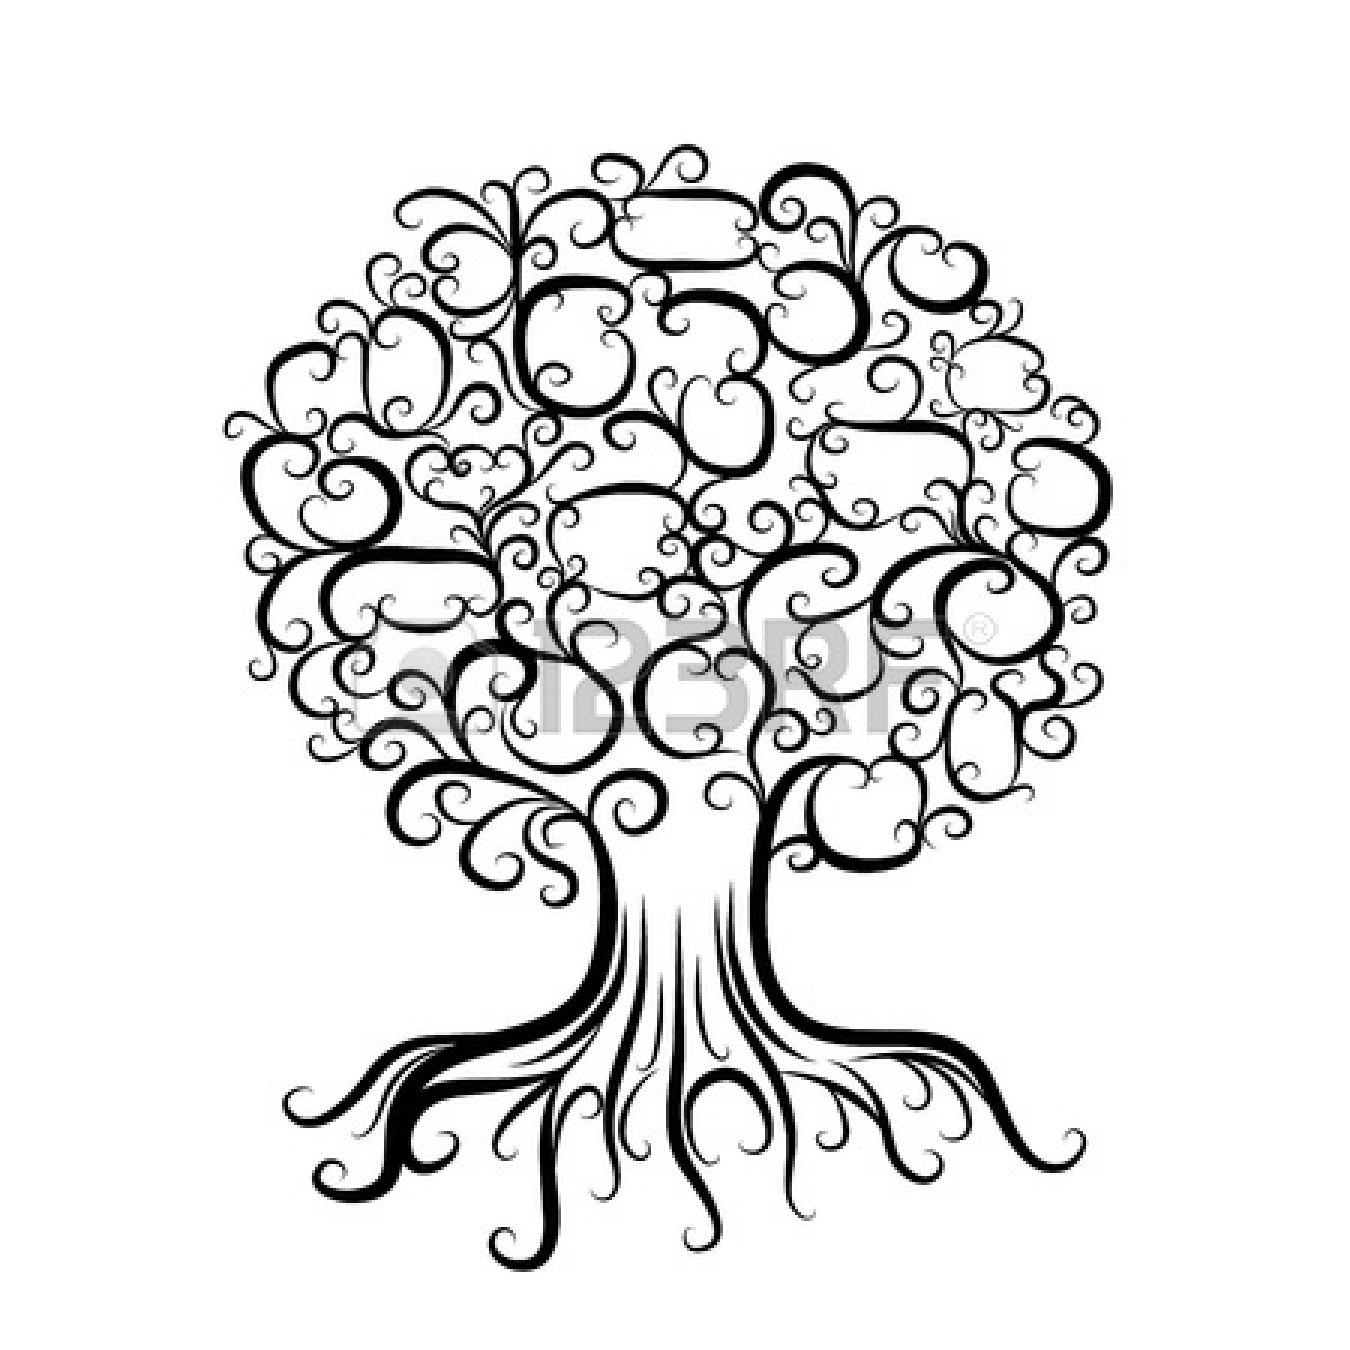 Ornamental tree with roots for | Clipart Panda - Free Clipart Images